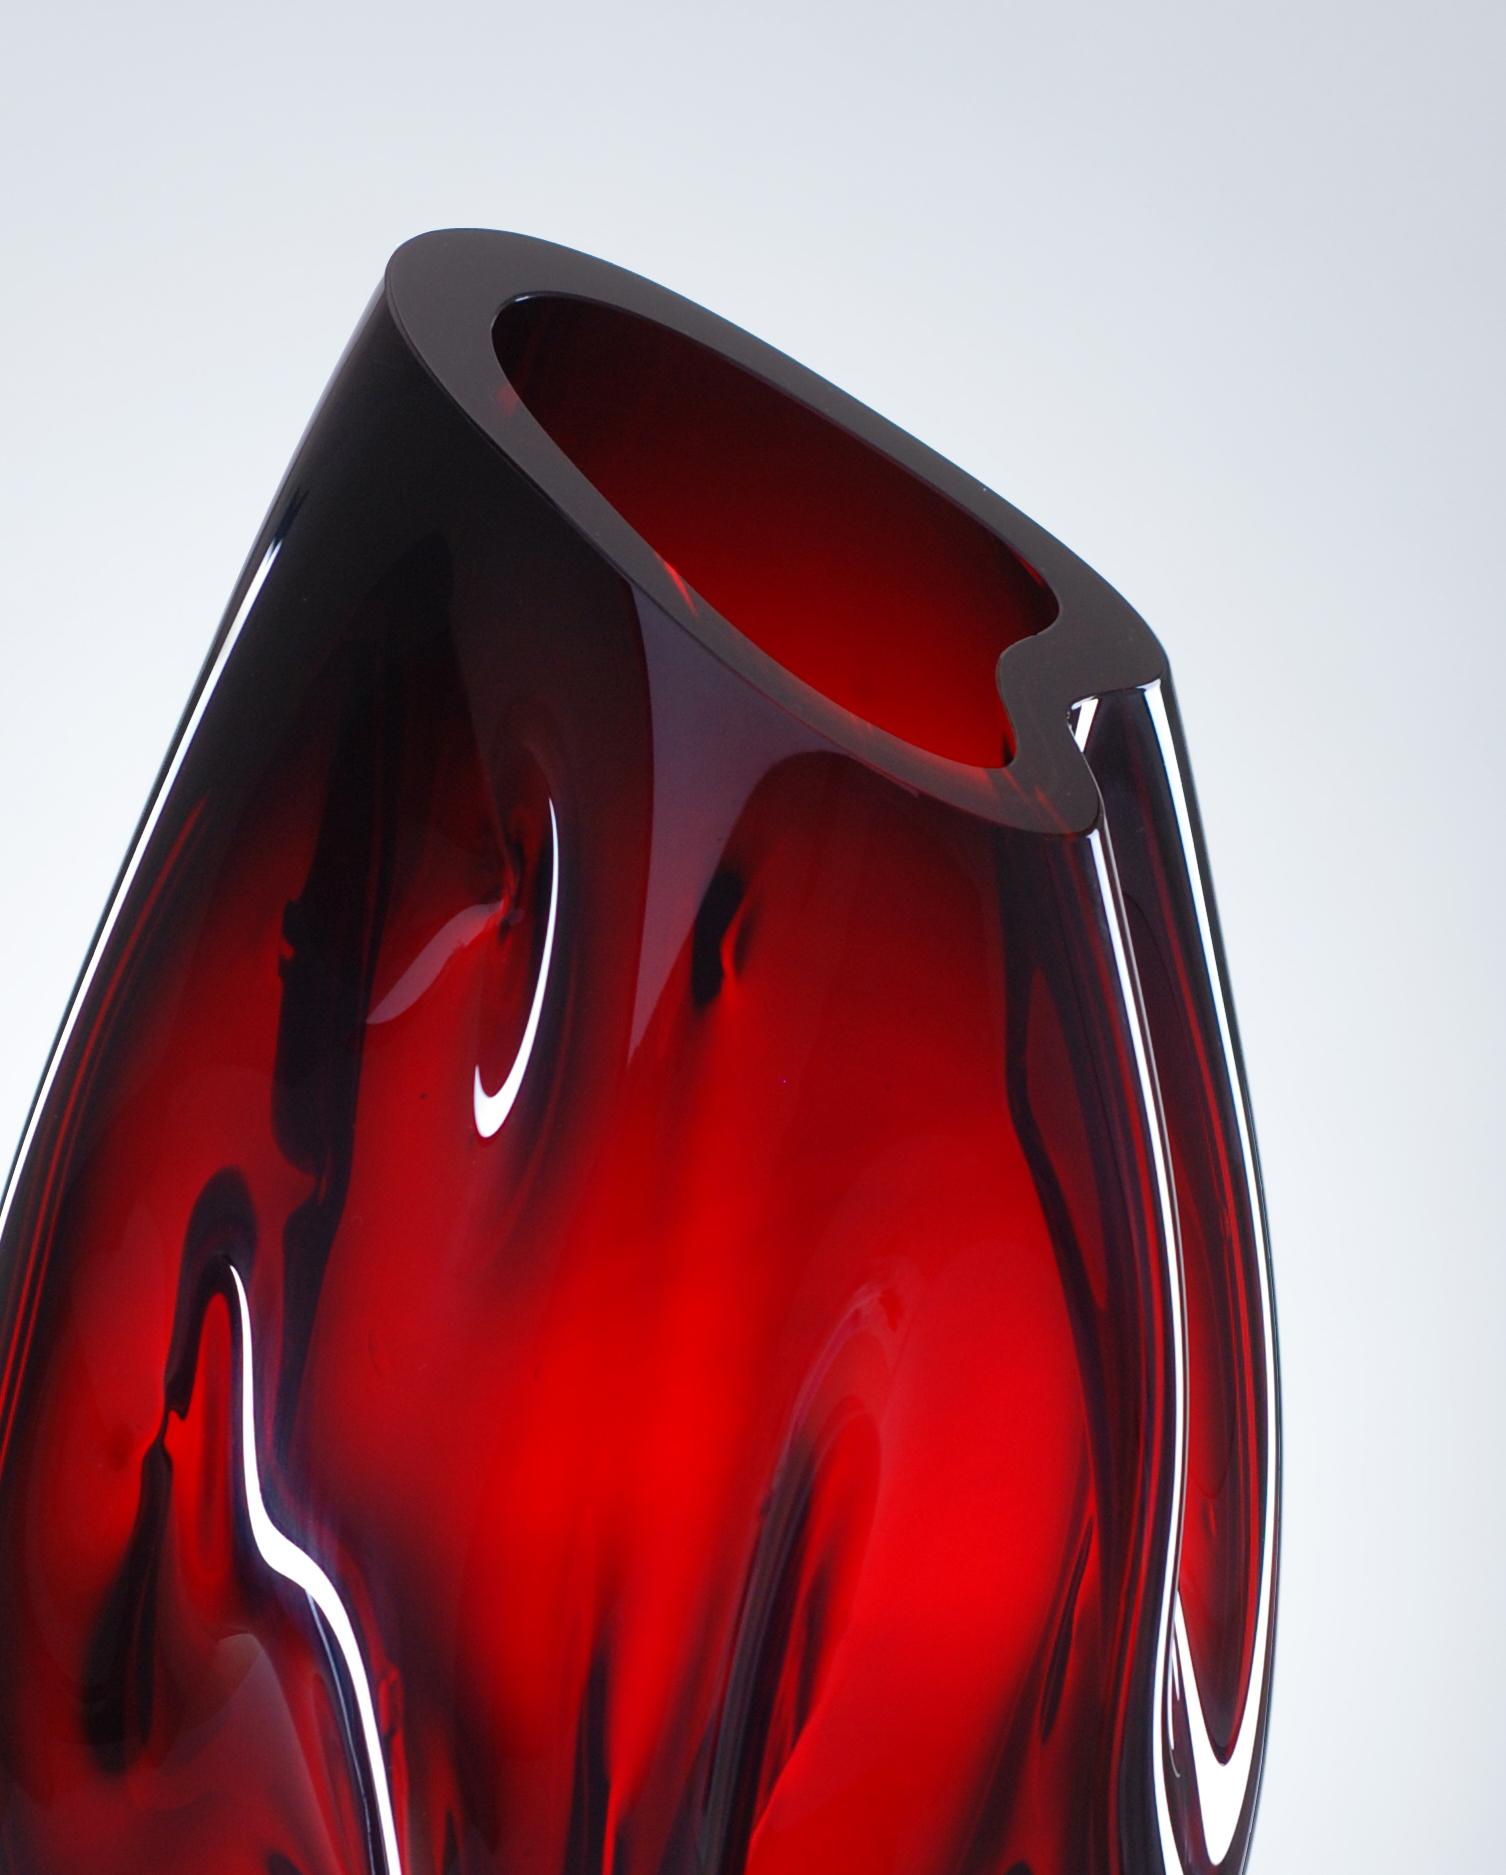 Hand blown glass vase, monumental size. Gold Ruby Red glass, almost black in massif. Smooth on surface. Original. Organic shape. Freehand shaped. Heavy solid glass.

This piece is part of collection of sculptural glass objects, vases and bowls.